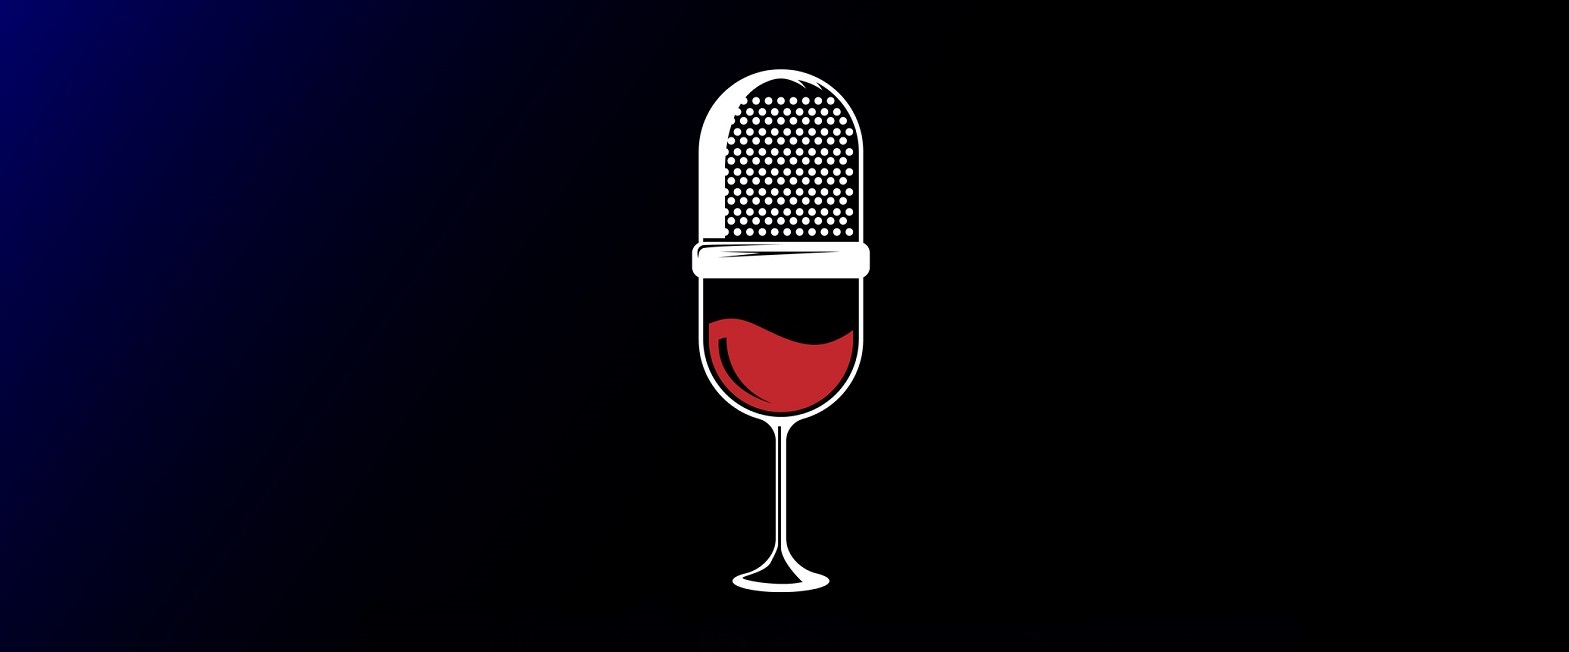 Best Wine Podcasts: Building Brand Awareness With "Internet Radio"